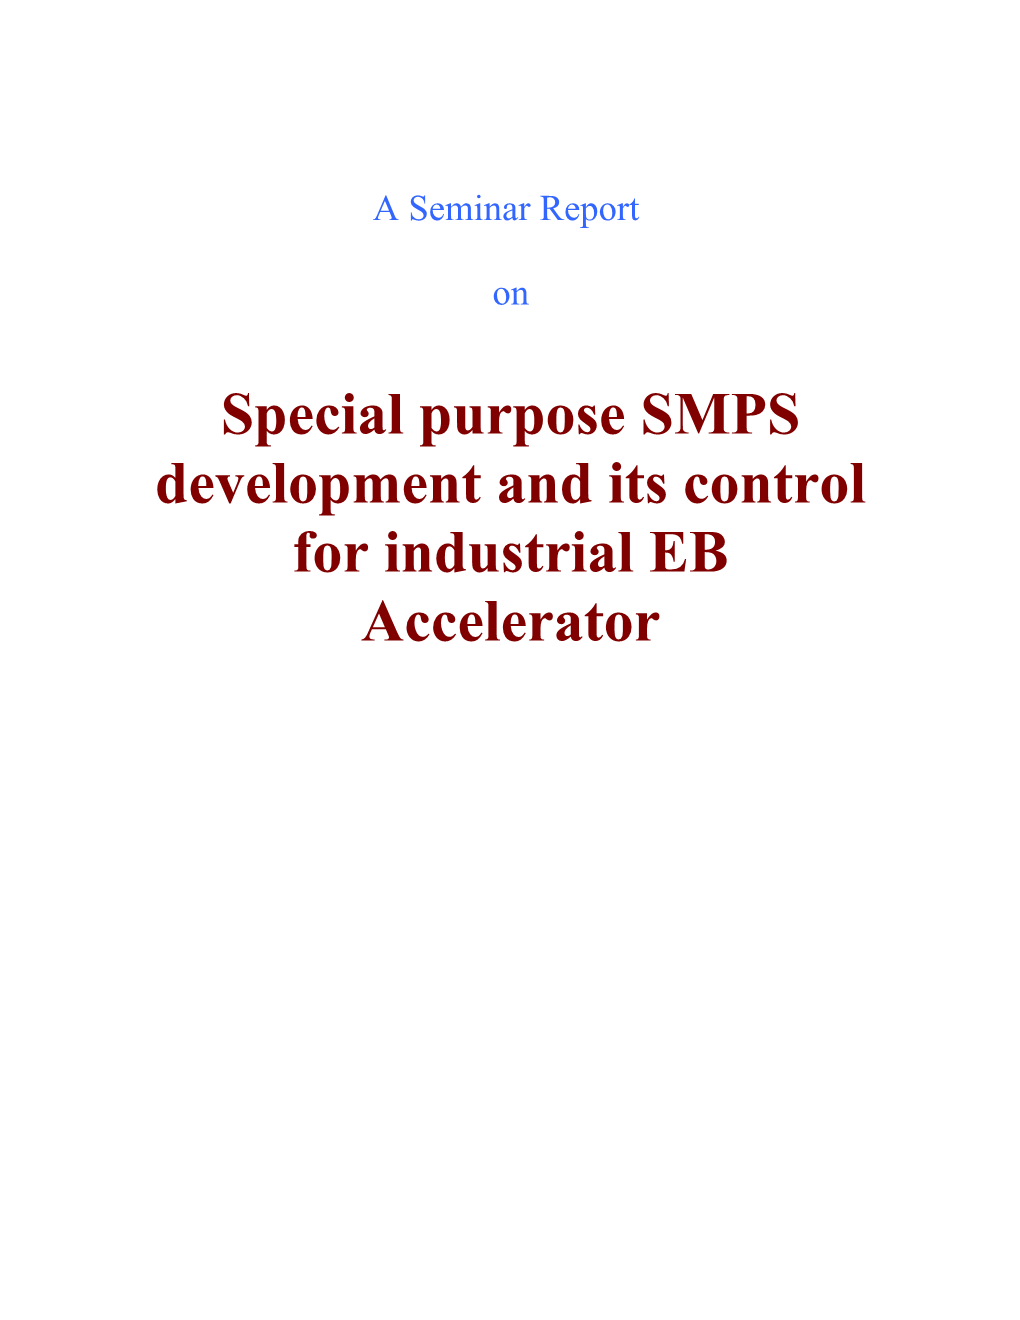 Special Purpose SMPS Development and Its Control for Industrial EB Accelerator